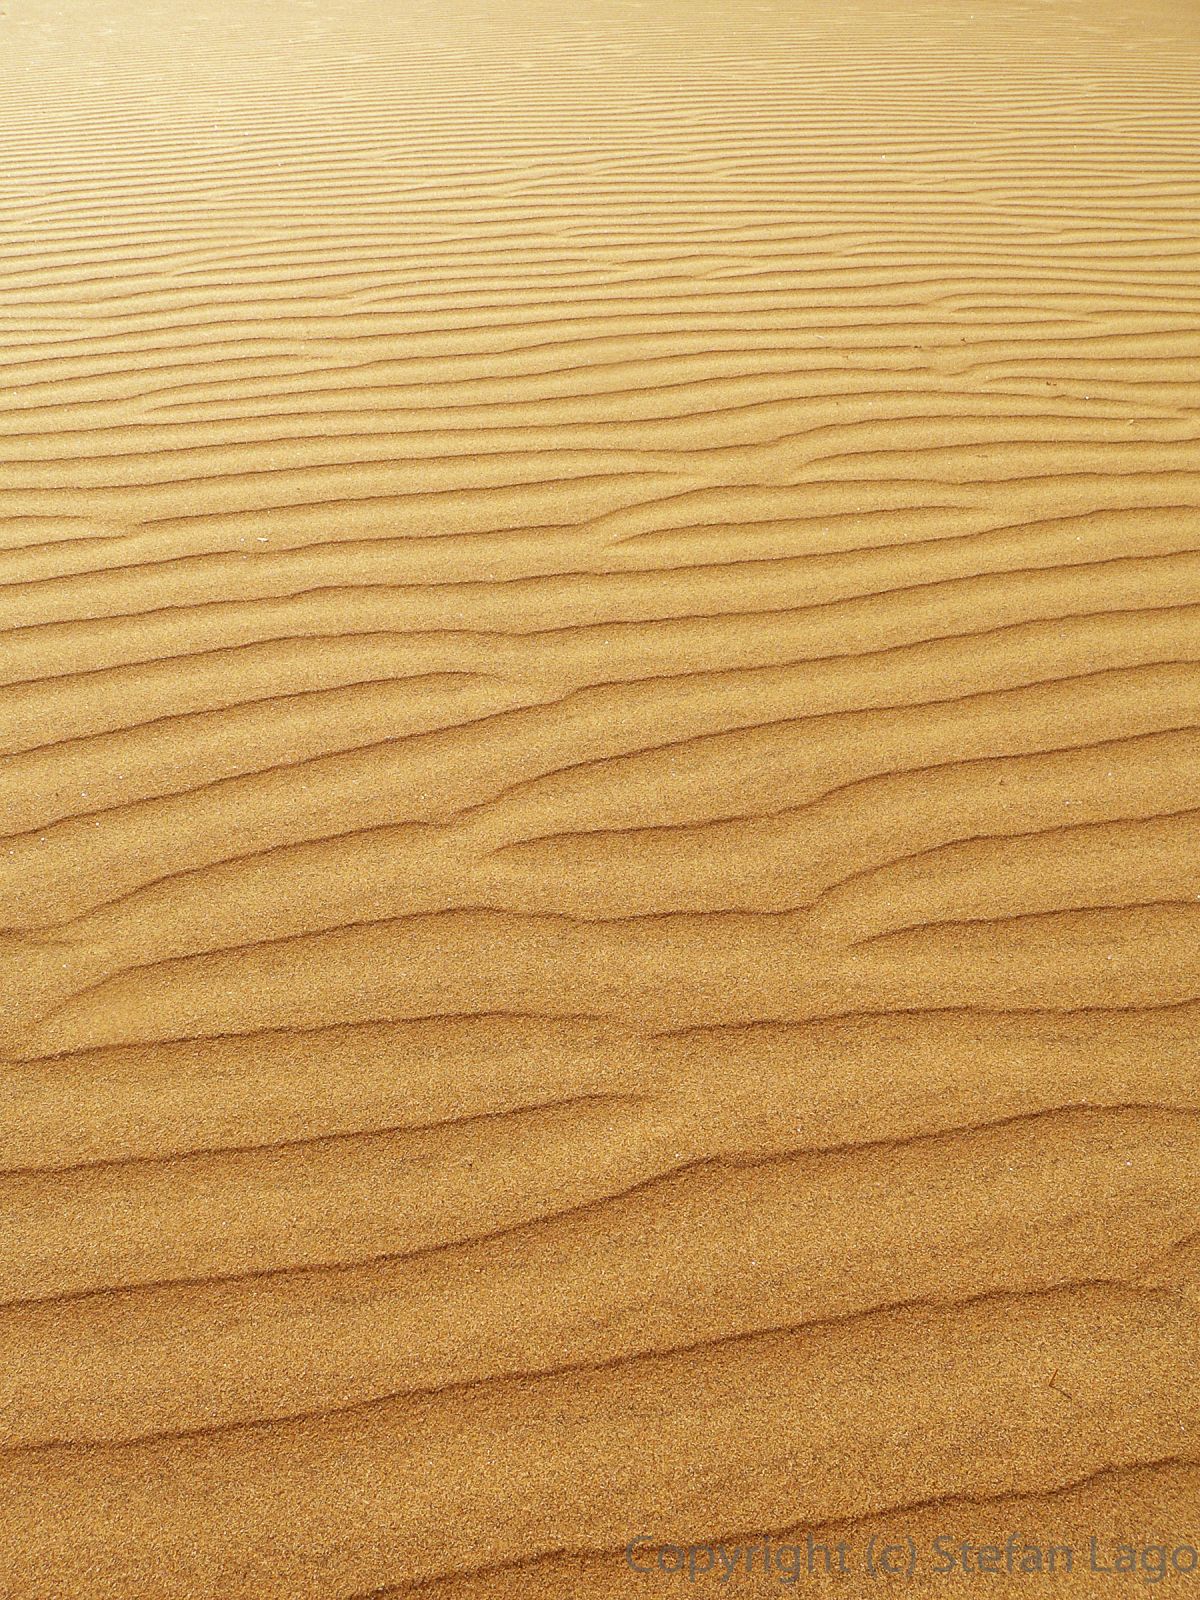 Windformed patterns in the dunes of Maspalomas, Gran Canaria.(1920 x 2560 px)